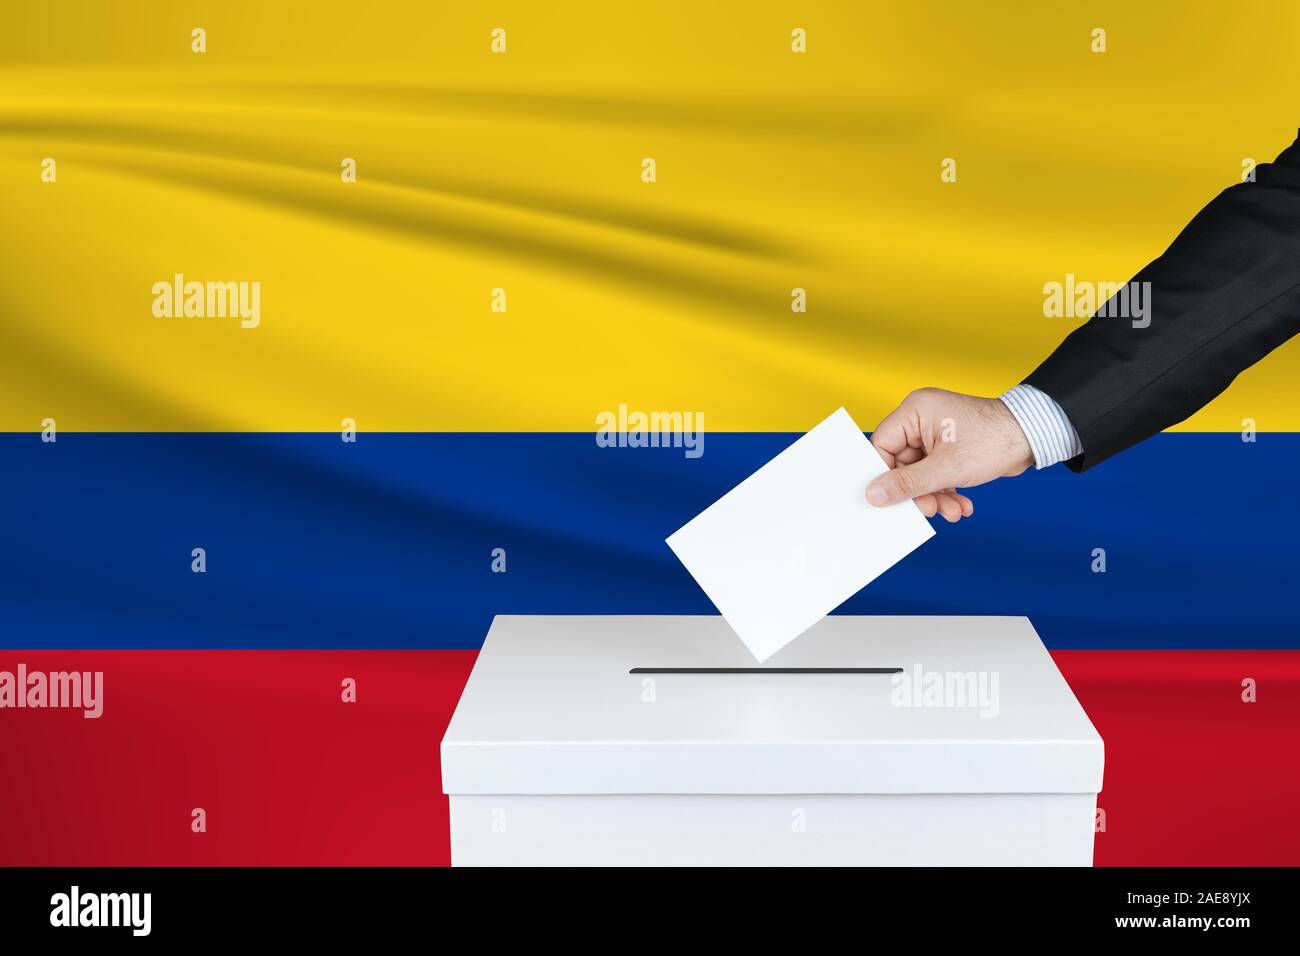 Election in Columbia. The hand of man putting his vote in the ballot box. Waved Columbia flag on background. Stock Photo